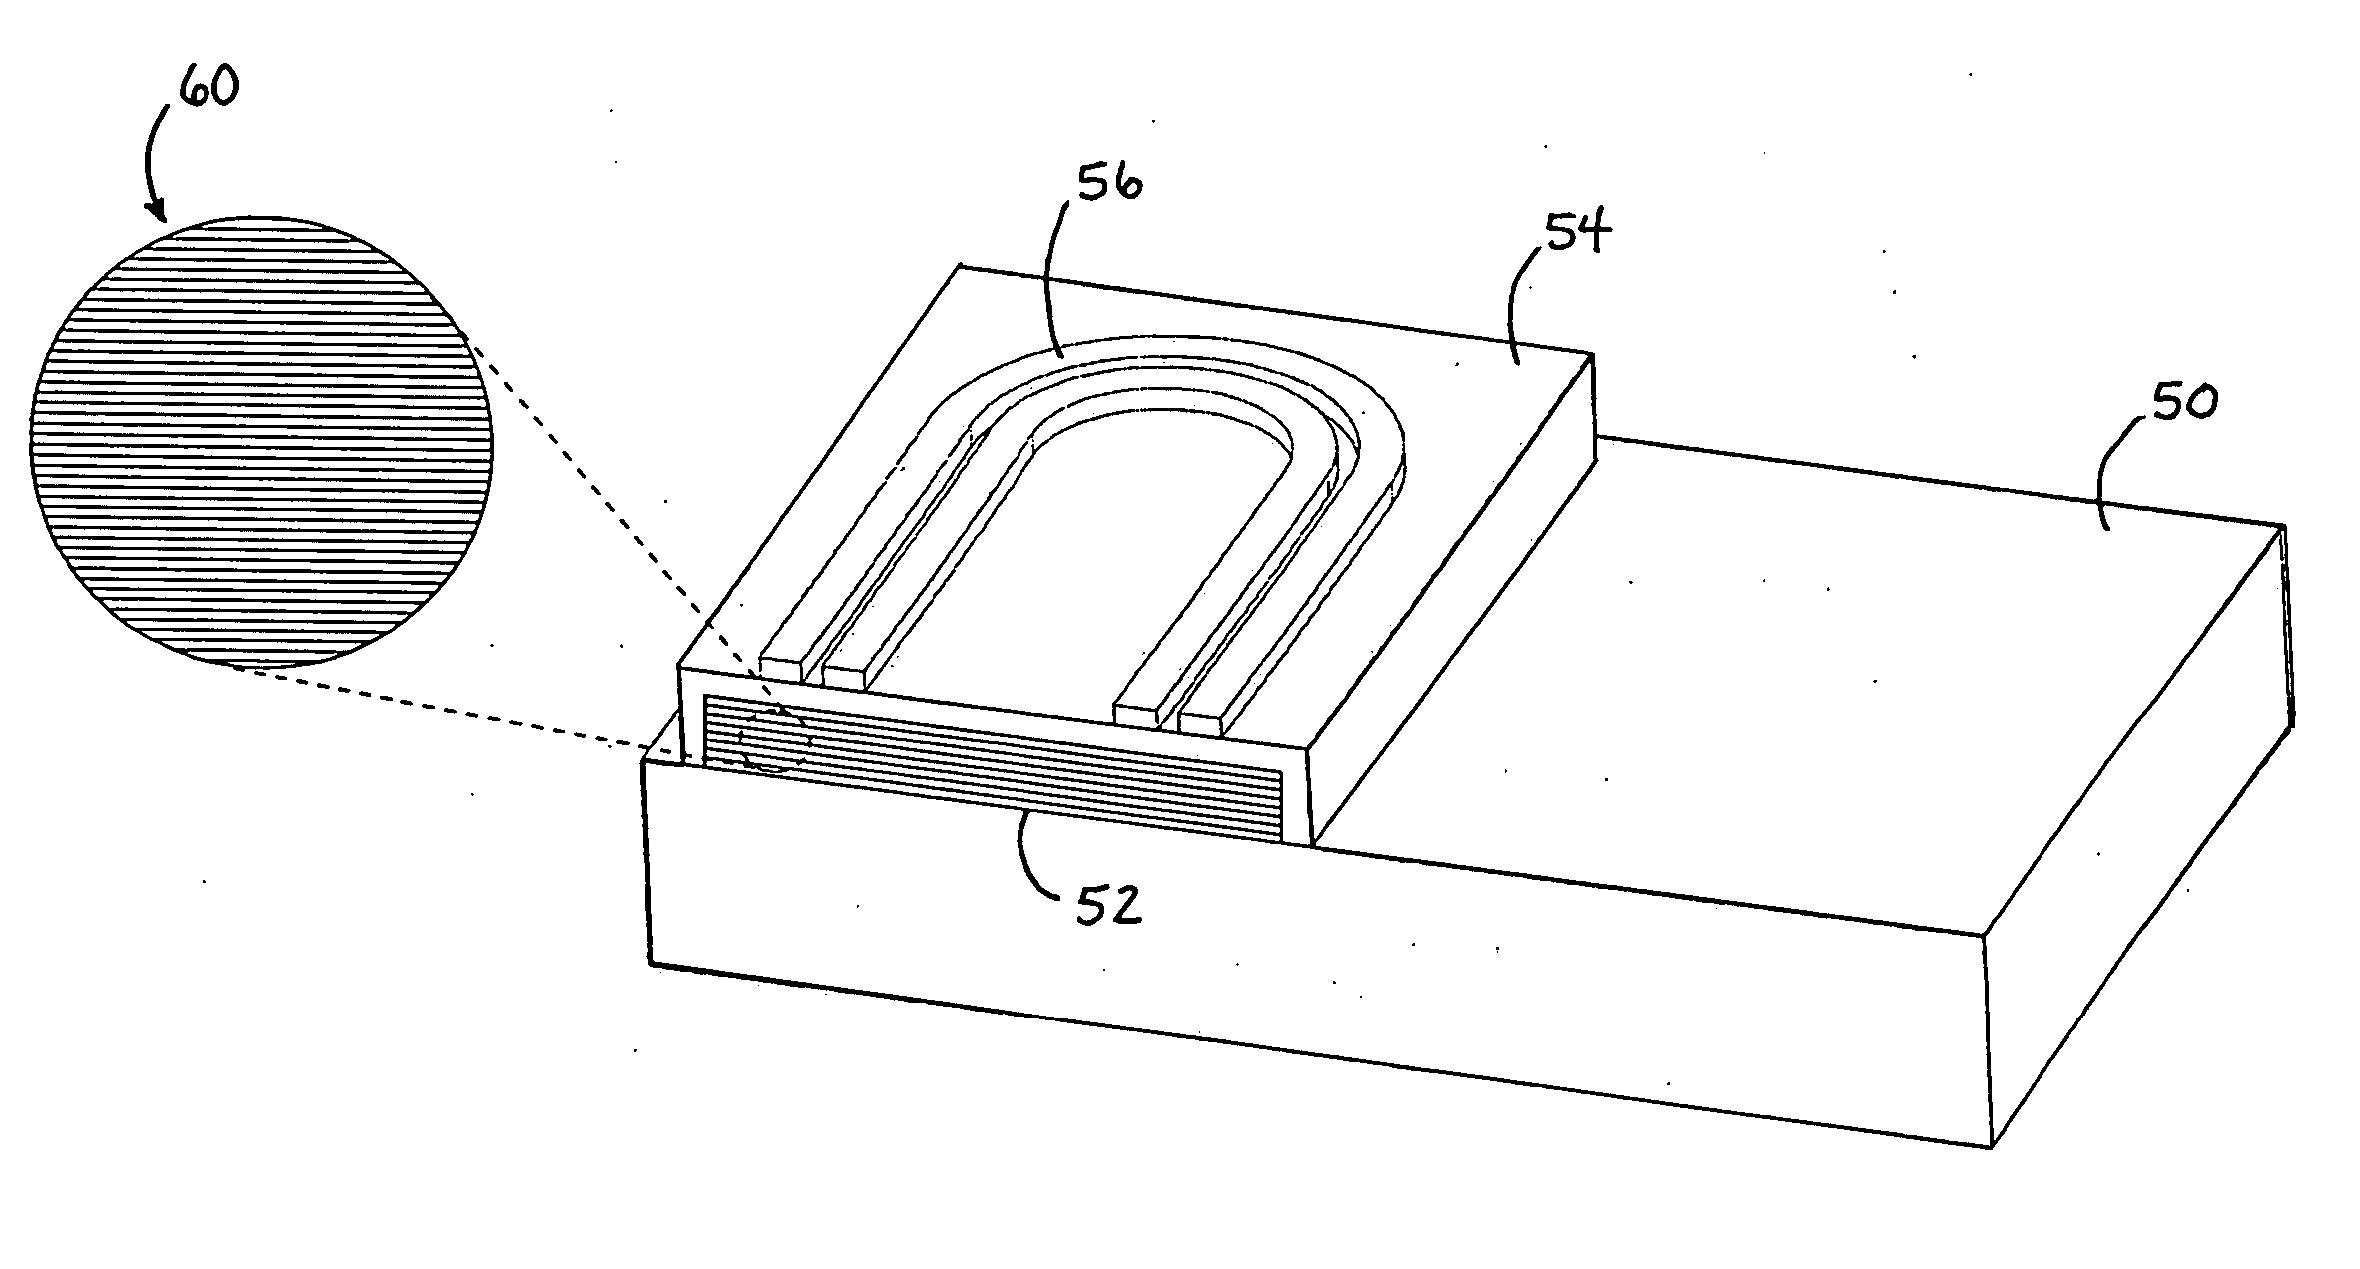 Systems & methods for flaw detection and monitoring at elevated temperatures with wireless communication using surface embedded, monolithically integrated, thin-film, magnetically actuated sensors, and methods for fabricating the sensors